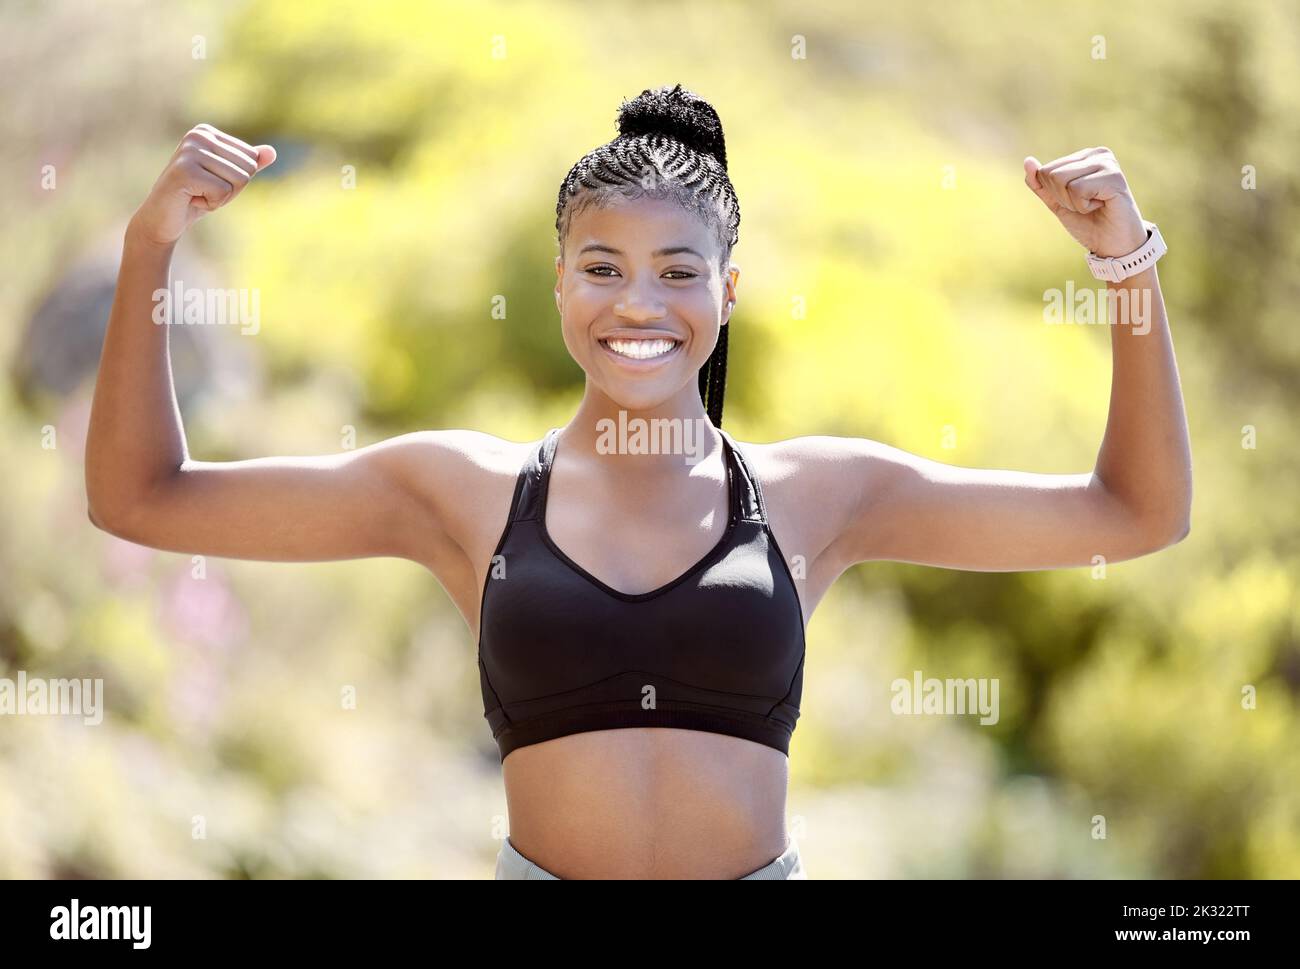 Sports woman with strong biceps doing exercise and training. Portrait of young black woman showing strength, fitness and muscles after exercising Stock Photo